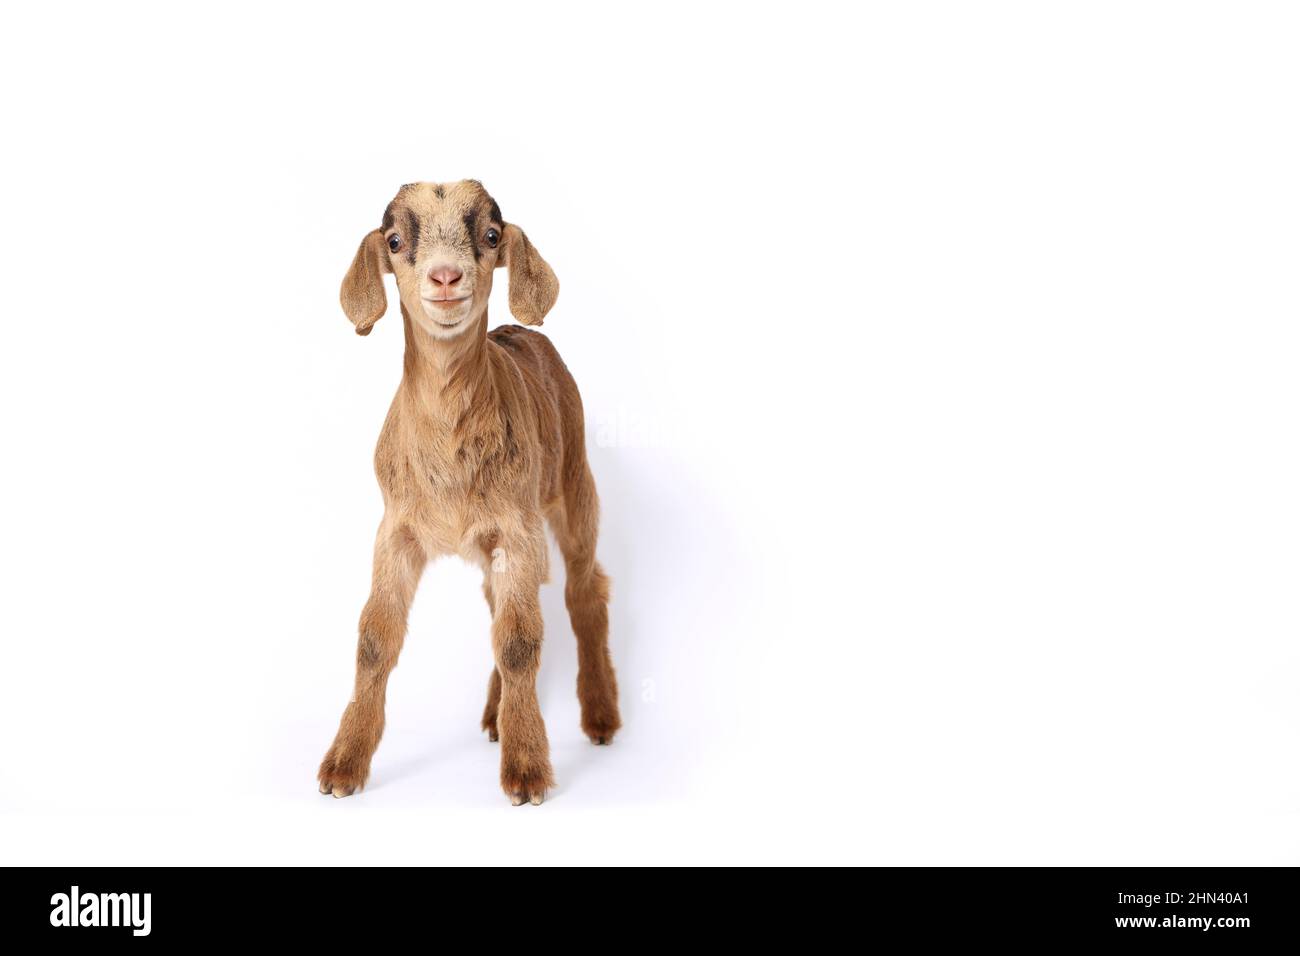 Domestic goat. Kid standing, seen against a white background. Germany Stock Photo